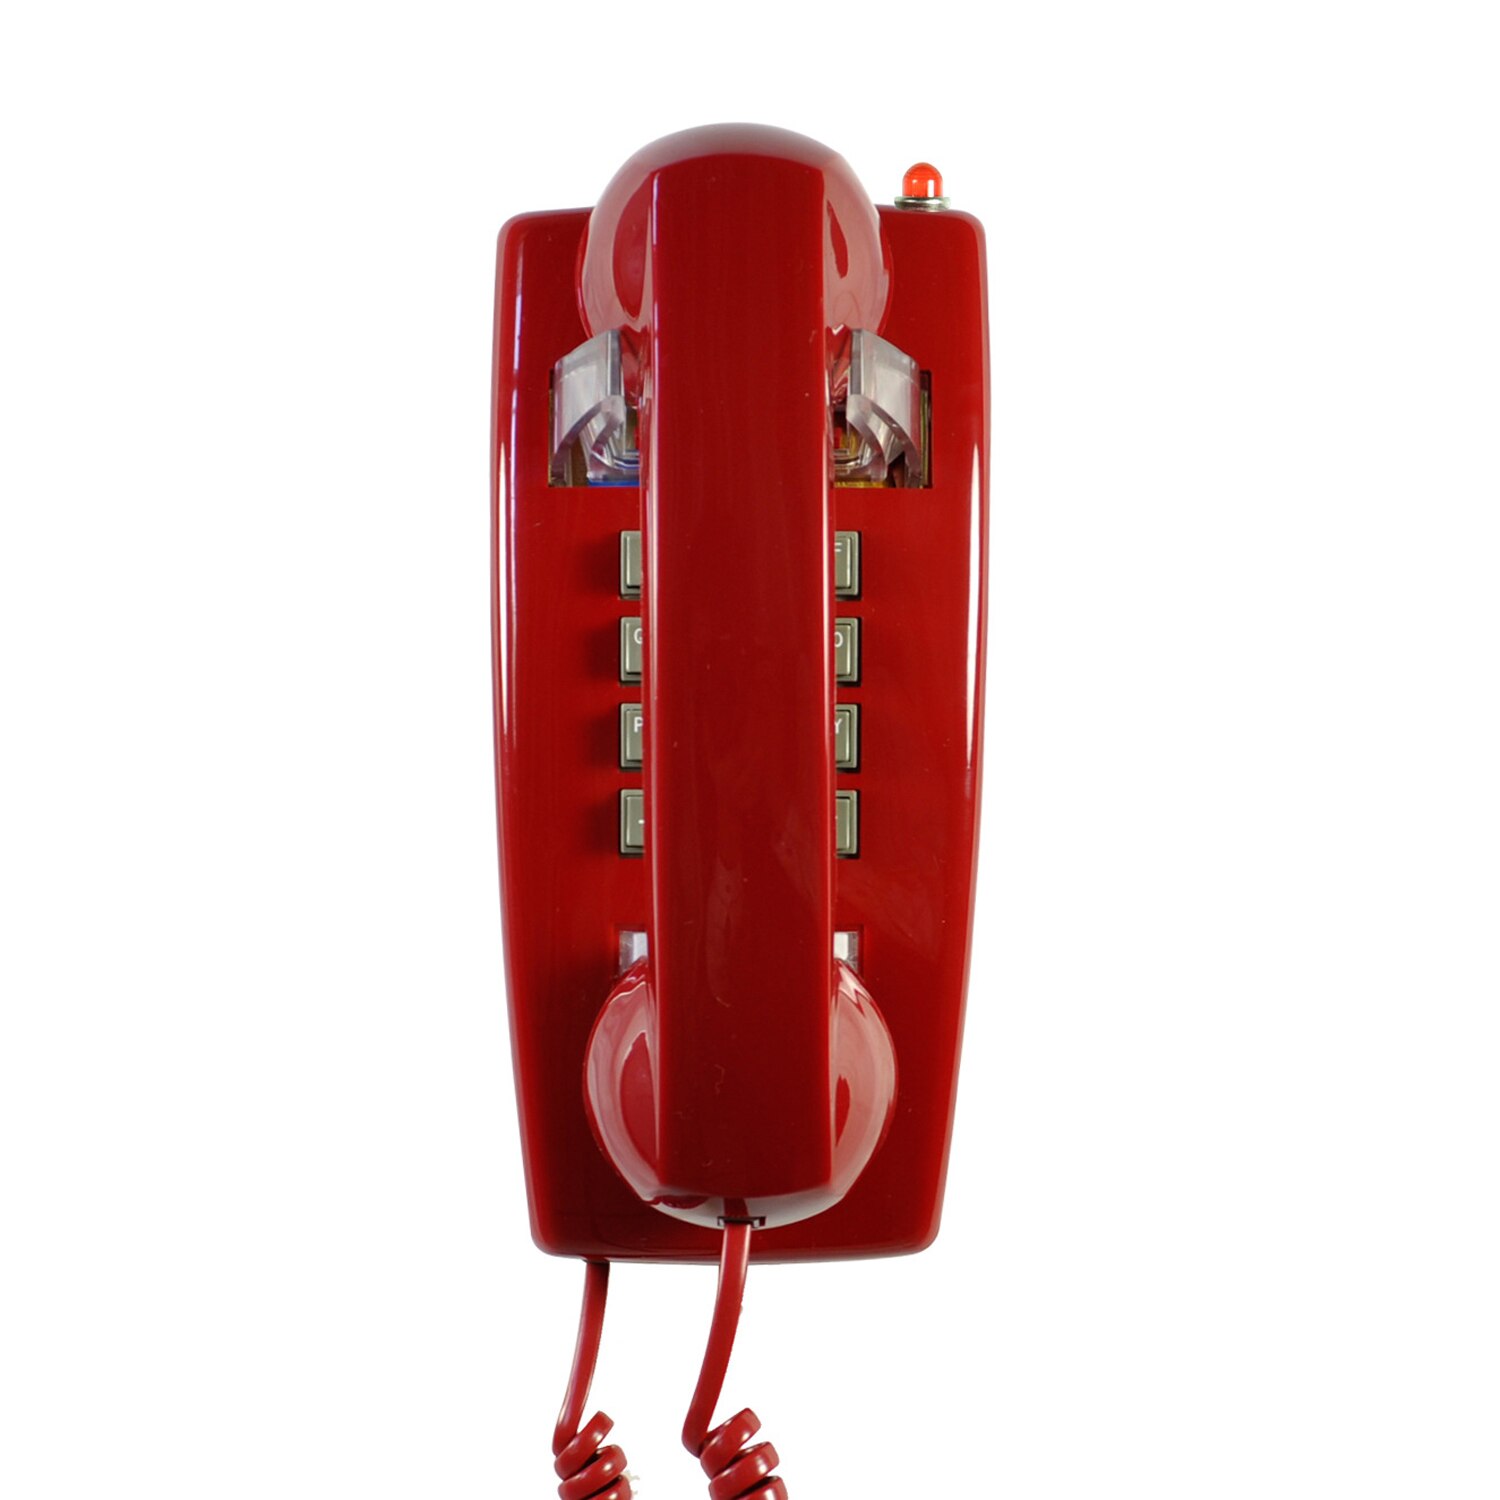 Trimline Telephone Land Line Vintage Wall Phone Retro Antique Wall Telephones Old Trimline Phone for Home Office: red telephone